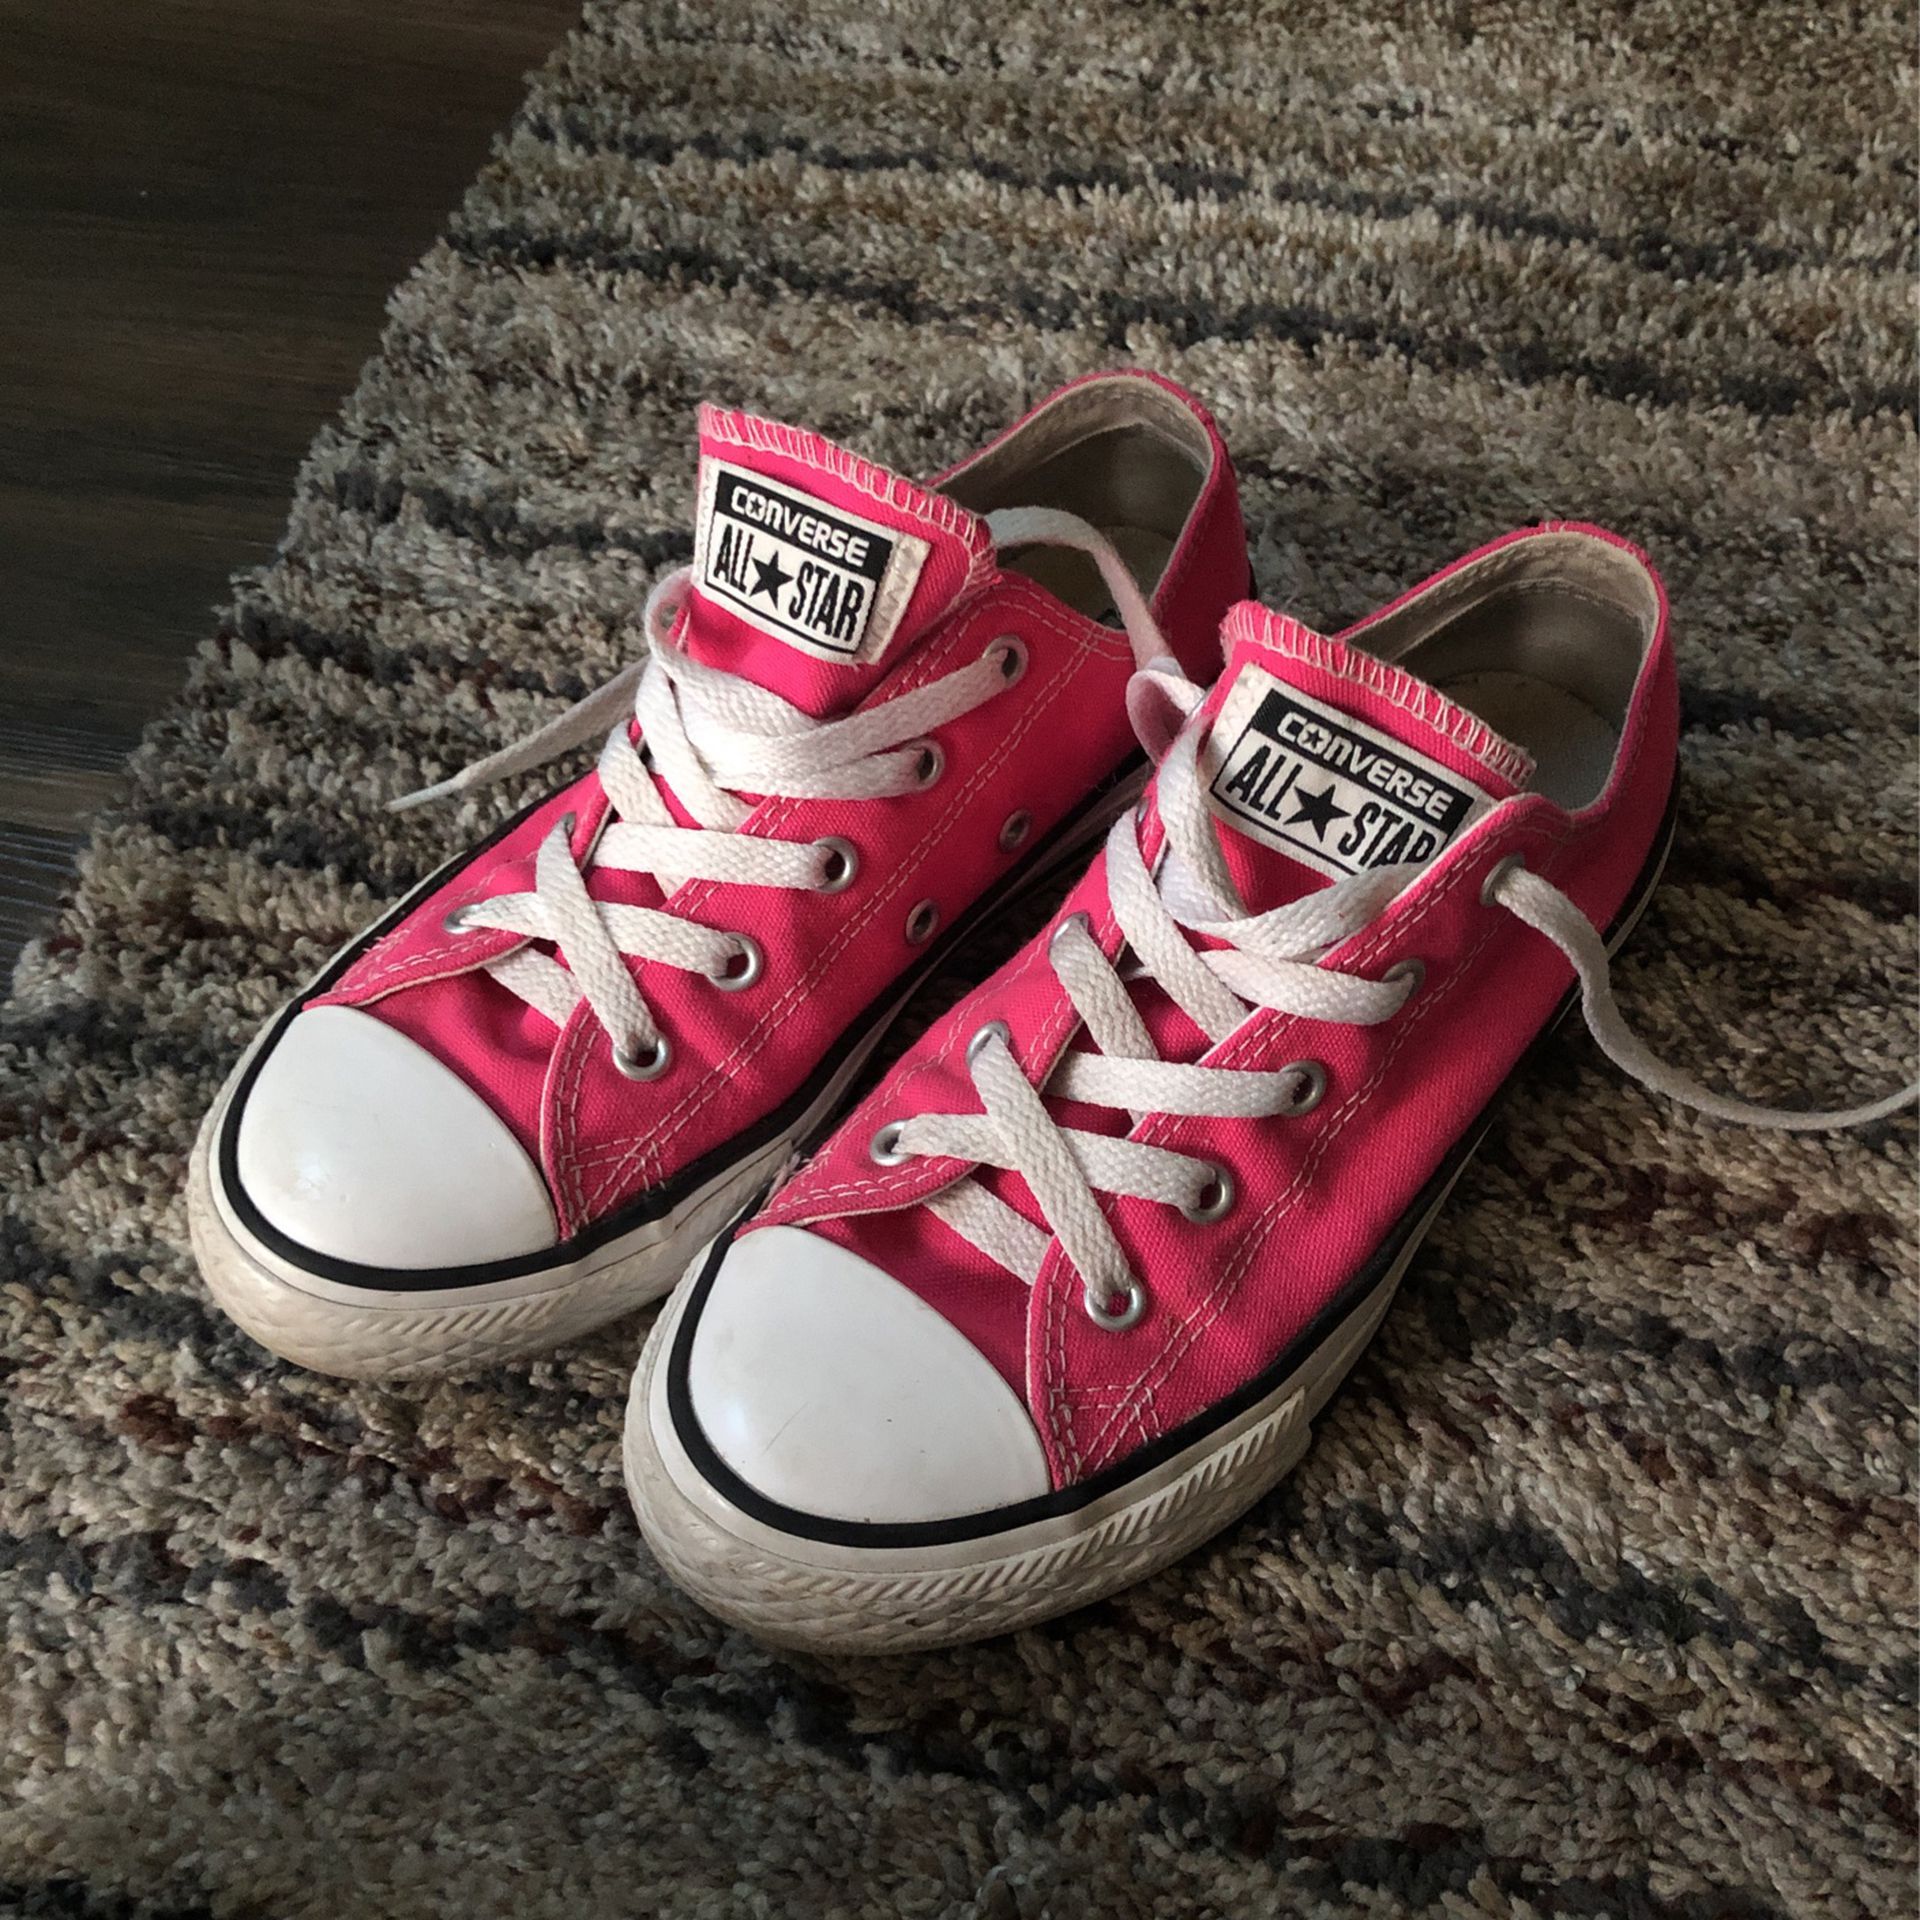 Girls Shoes Size 2 ! for Sale in Lynnwood, WA - OfferUp